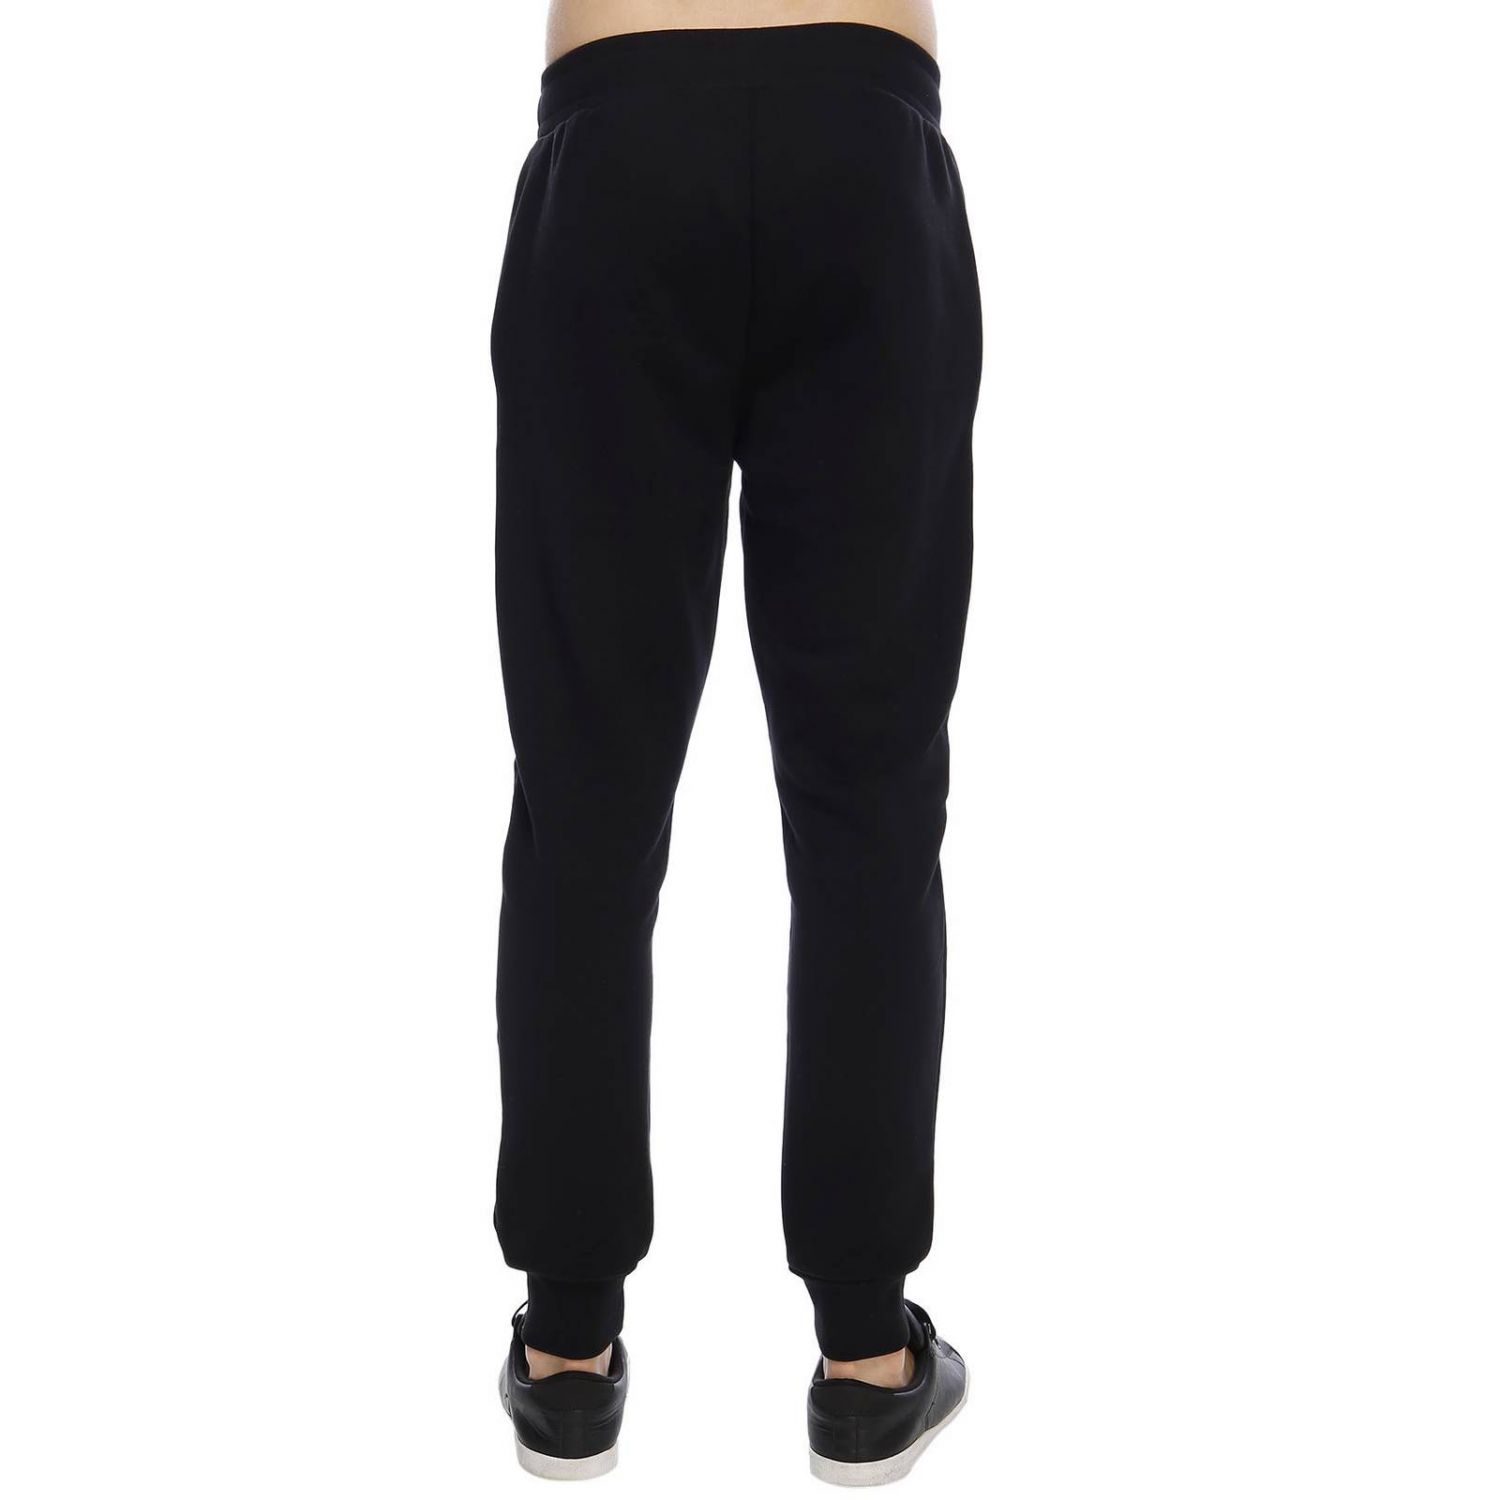 Moschino Couture Outlet: Pants men - Black | Pants Moschino Couture ...